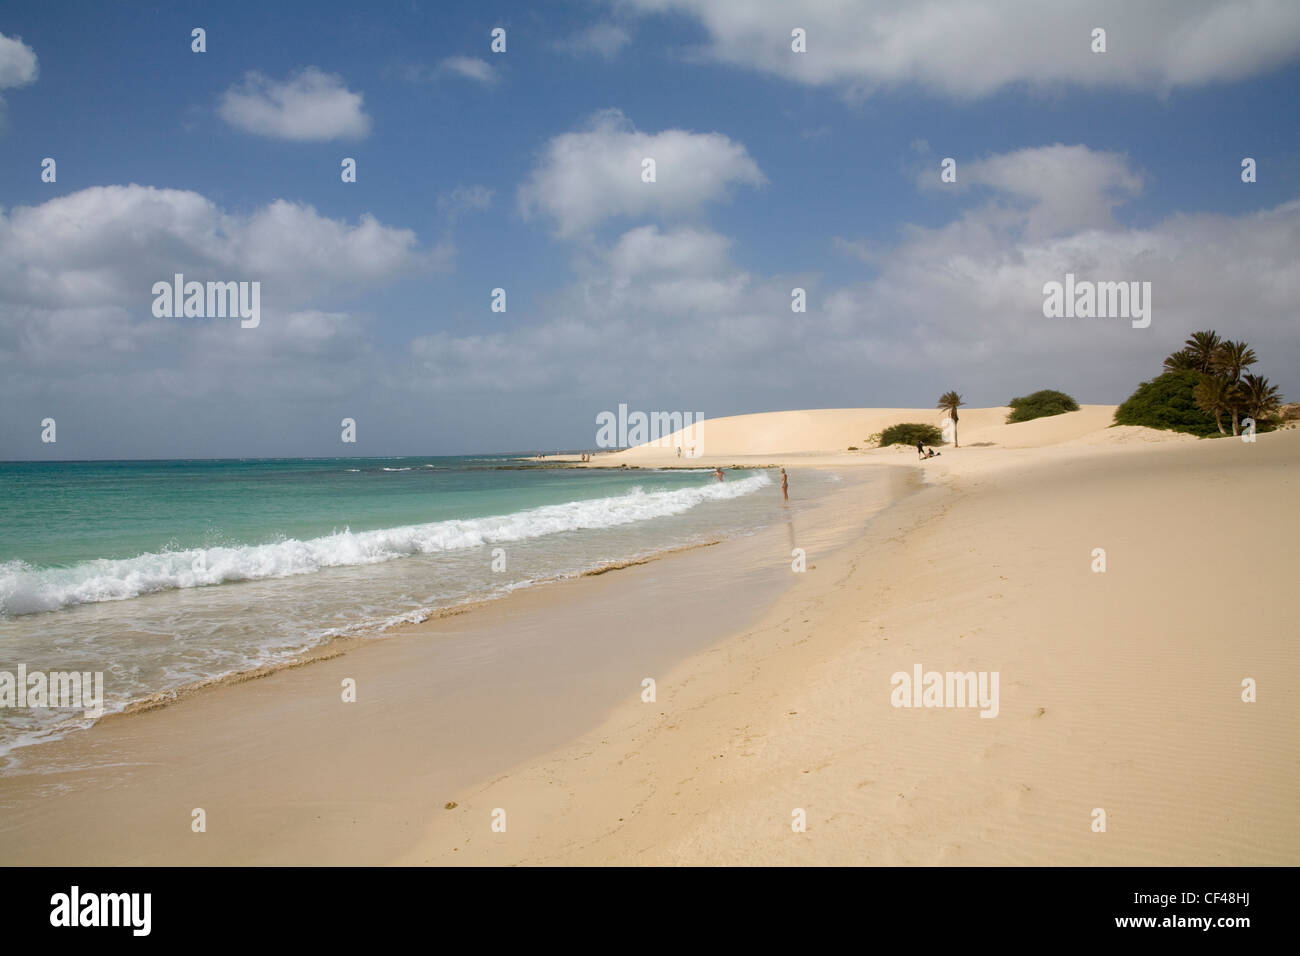 Rabil Boa Vista Cape Verde February Bathers and walkers on beach of Areja de Chaves in this exotic island popular with tourists Stock Photo